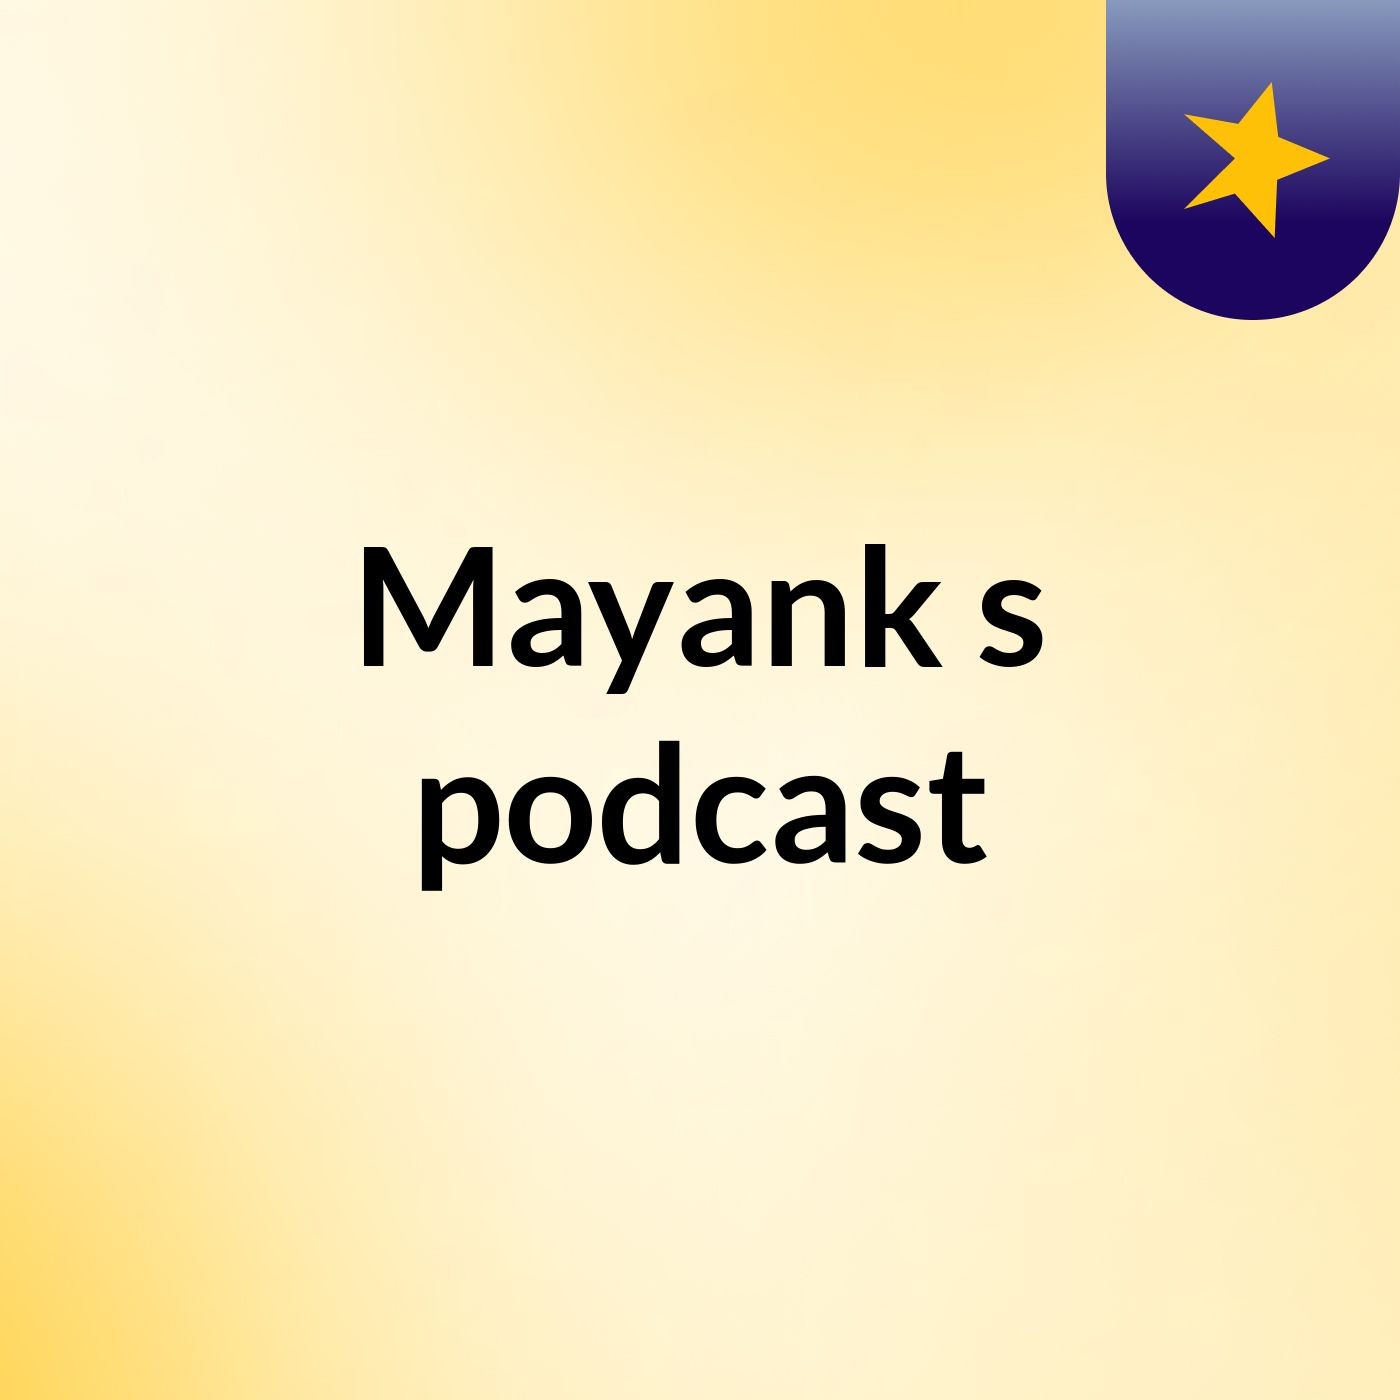 Episode 2 - Mayank's podcast